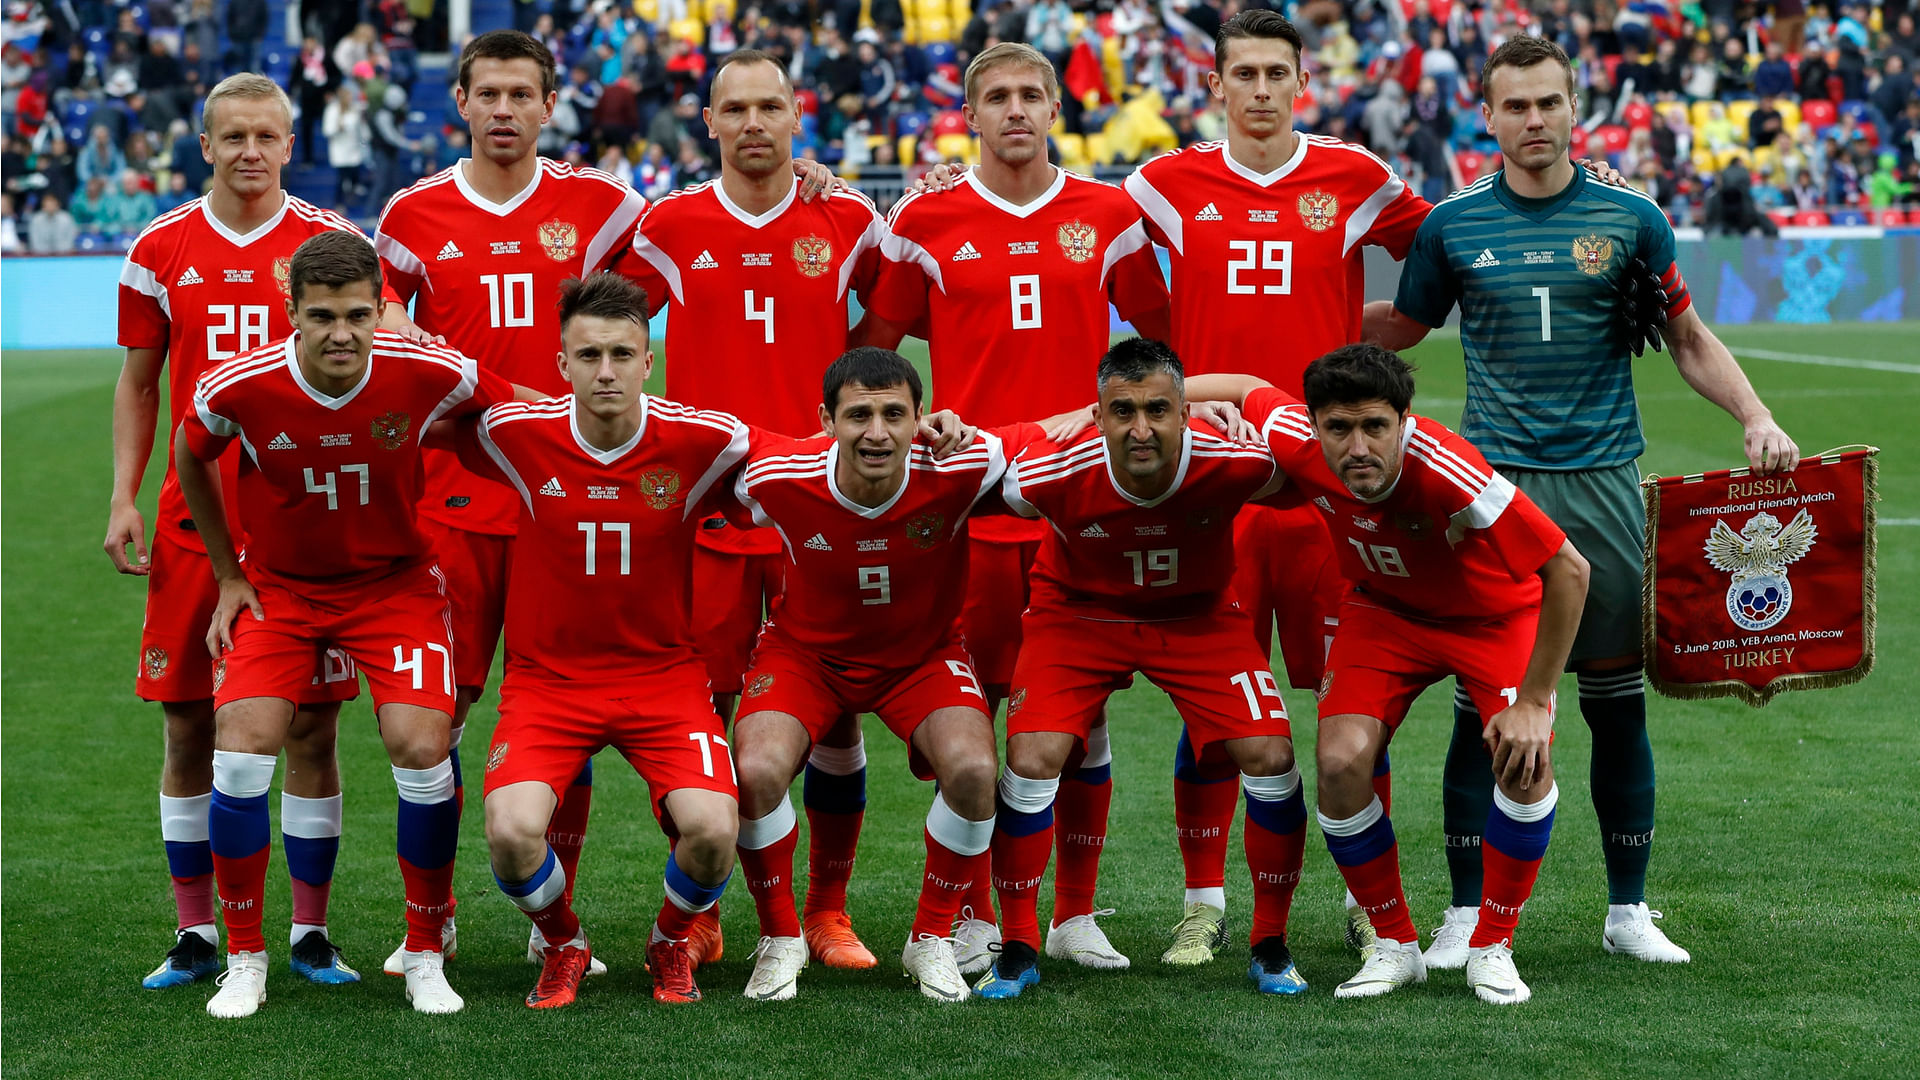 The Russian national  team for World Cup 2018 haven’t won any of their last 7 international games